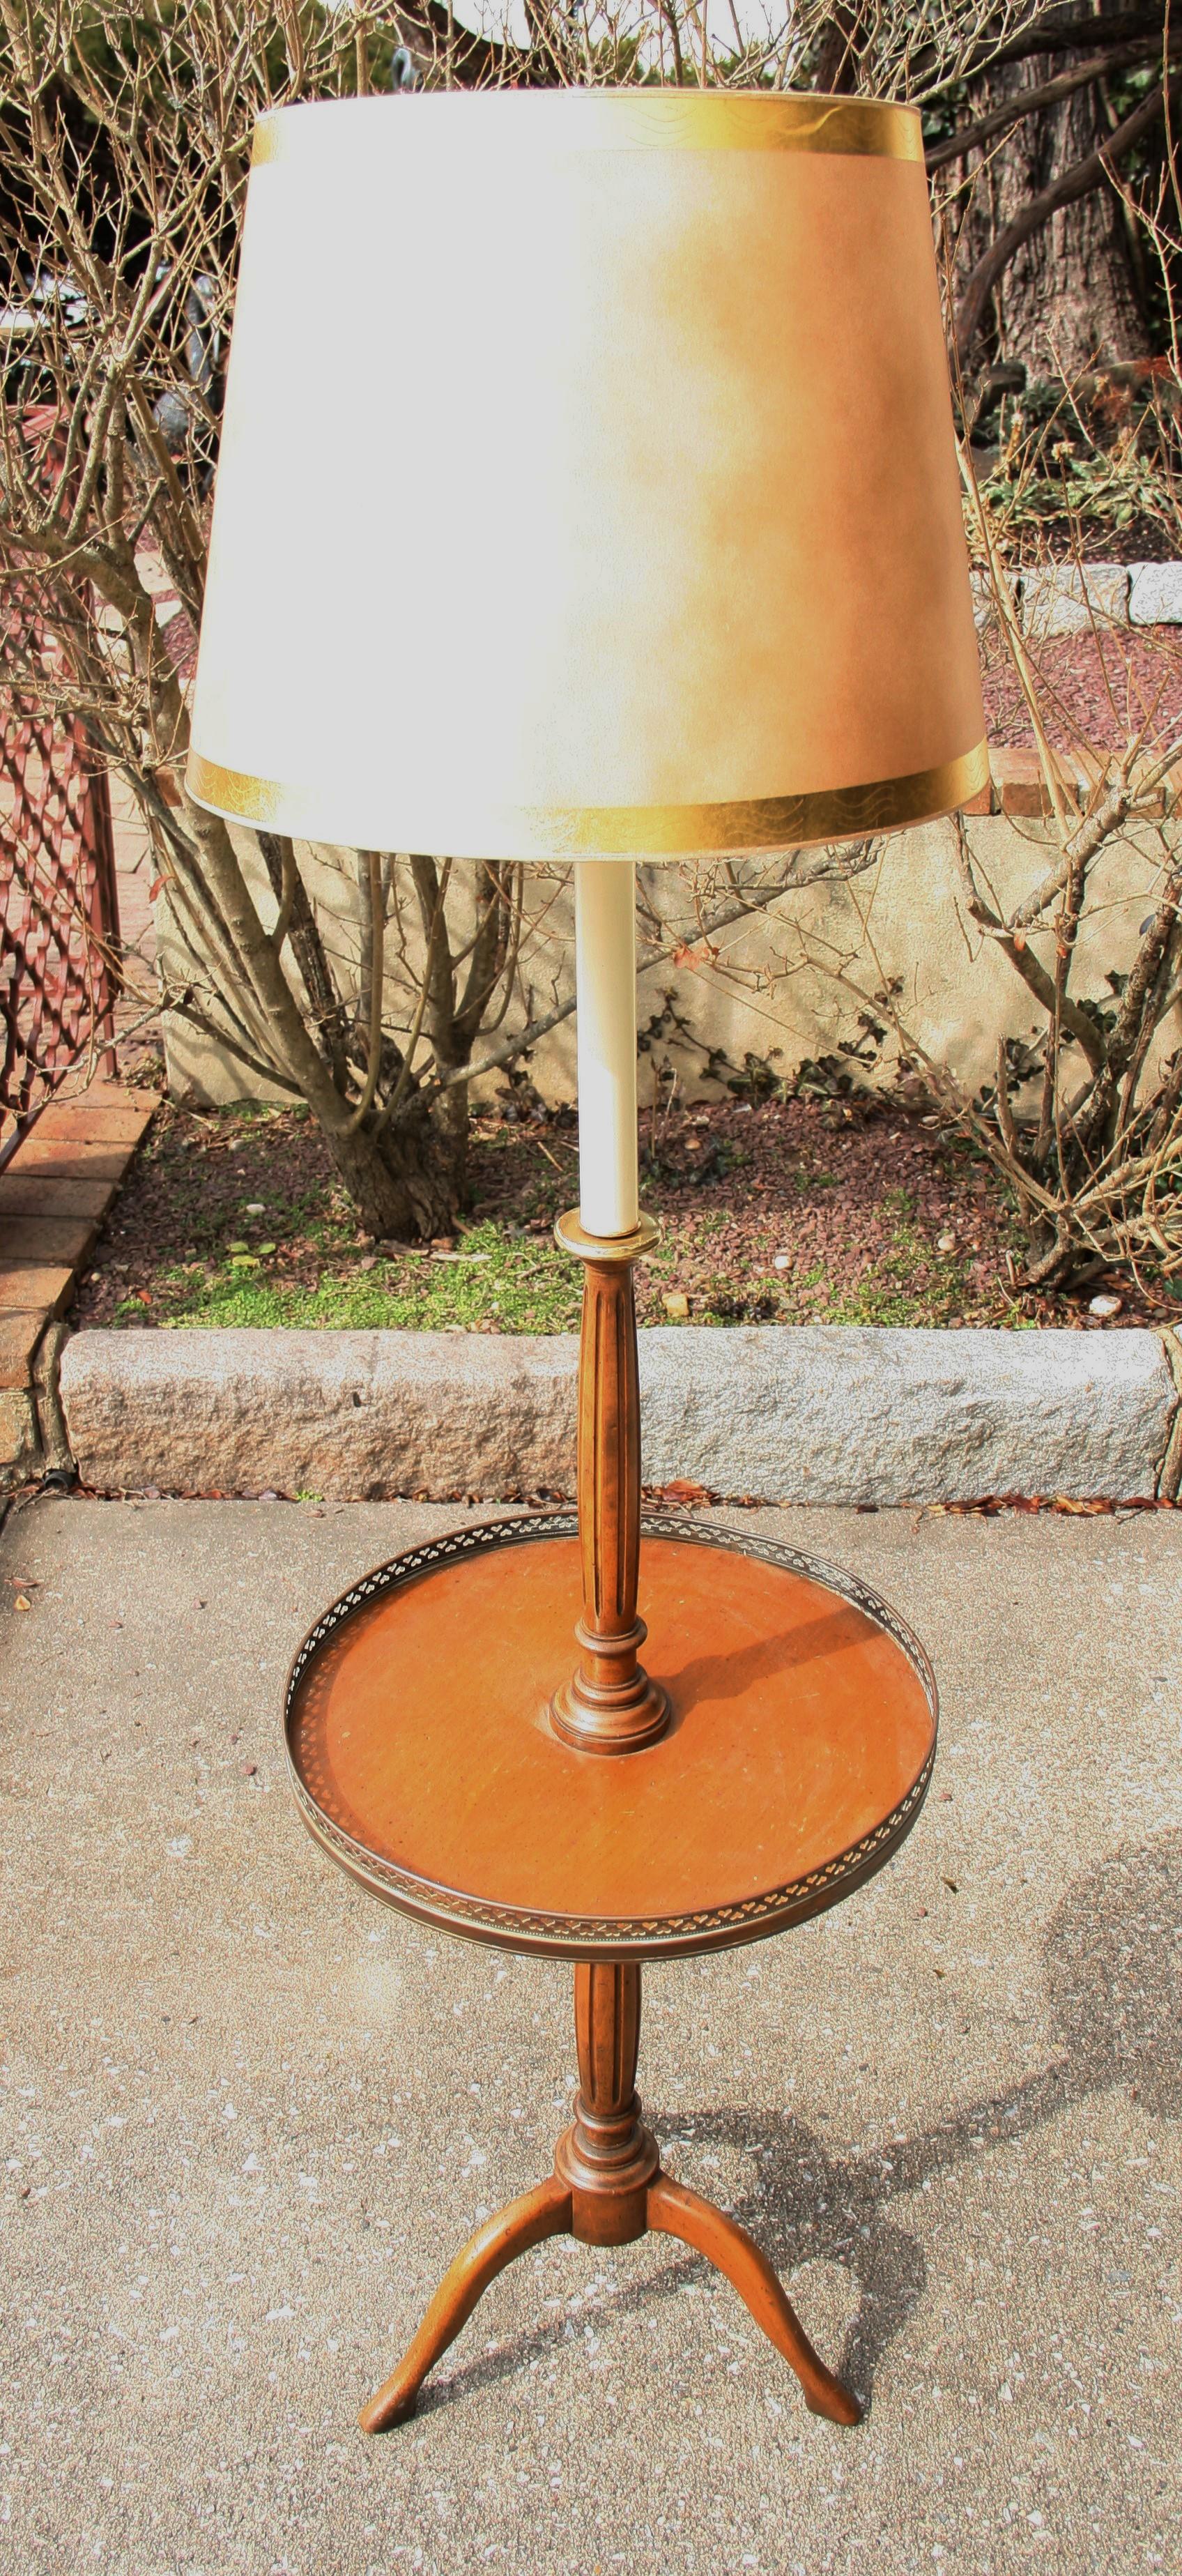 1597 tripod wood floor lamp with integrated table with brass gallery.
Measures: Height to top of socket 53